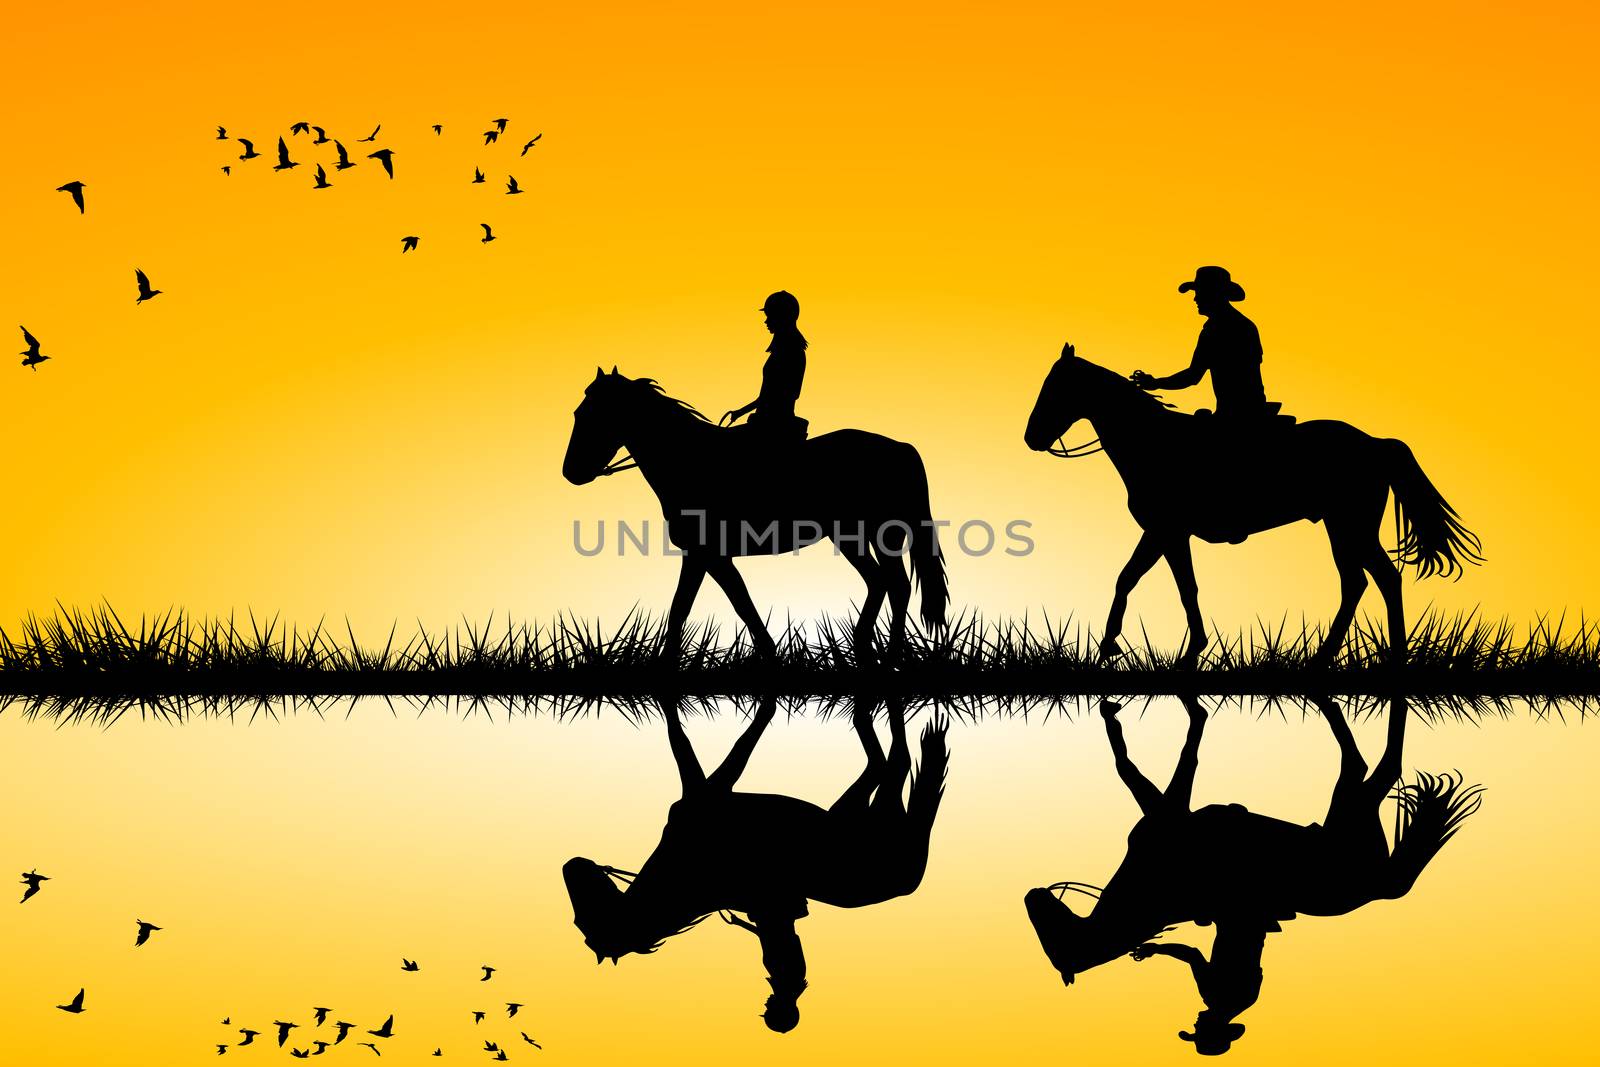 Two riders on horses standing together on sunset by hibrida13